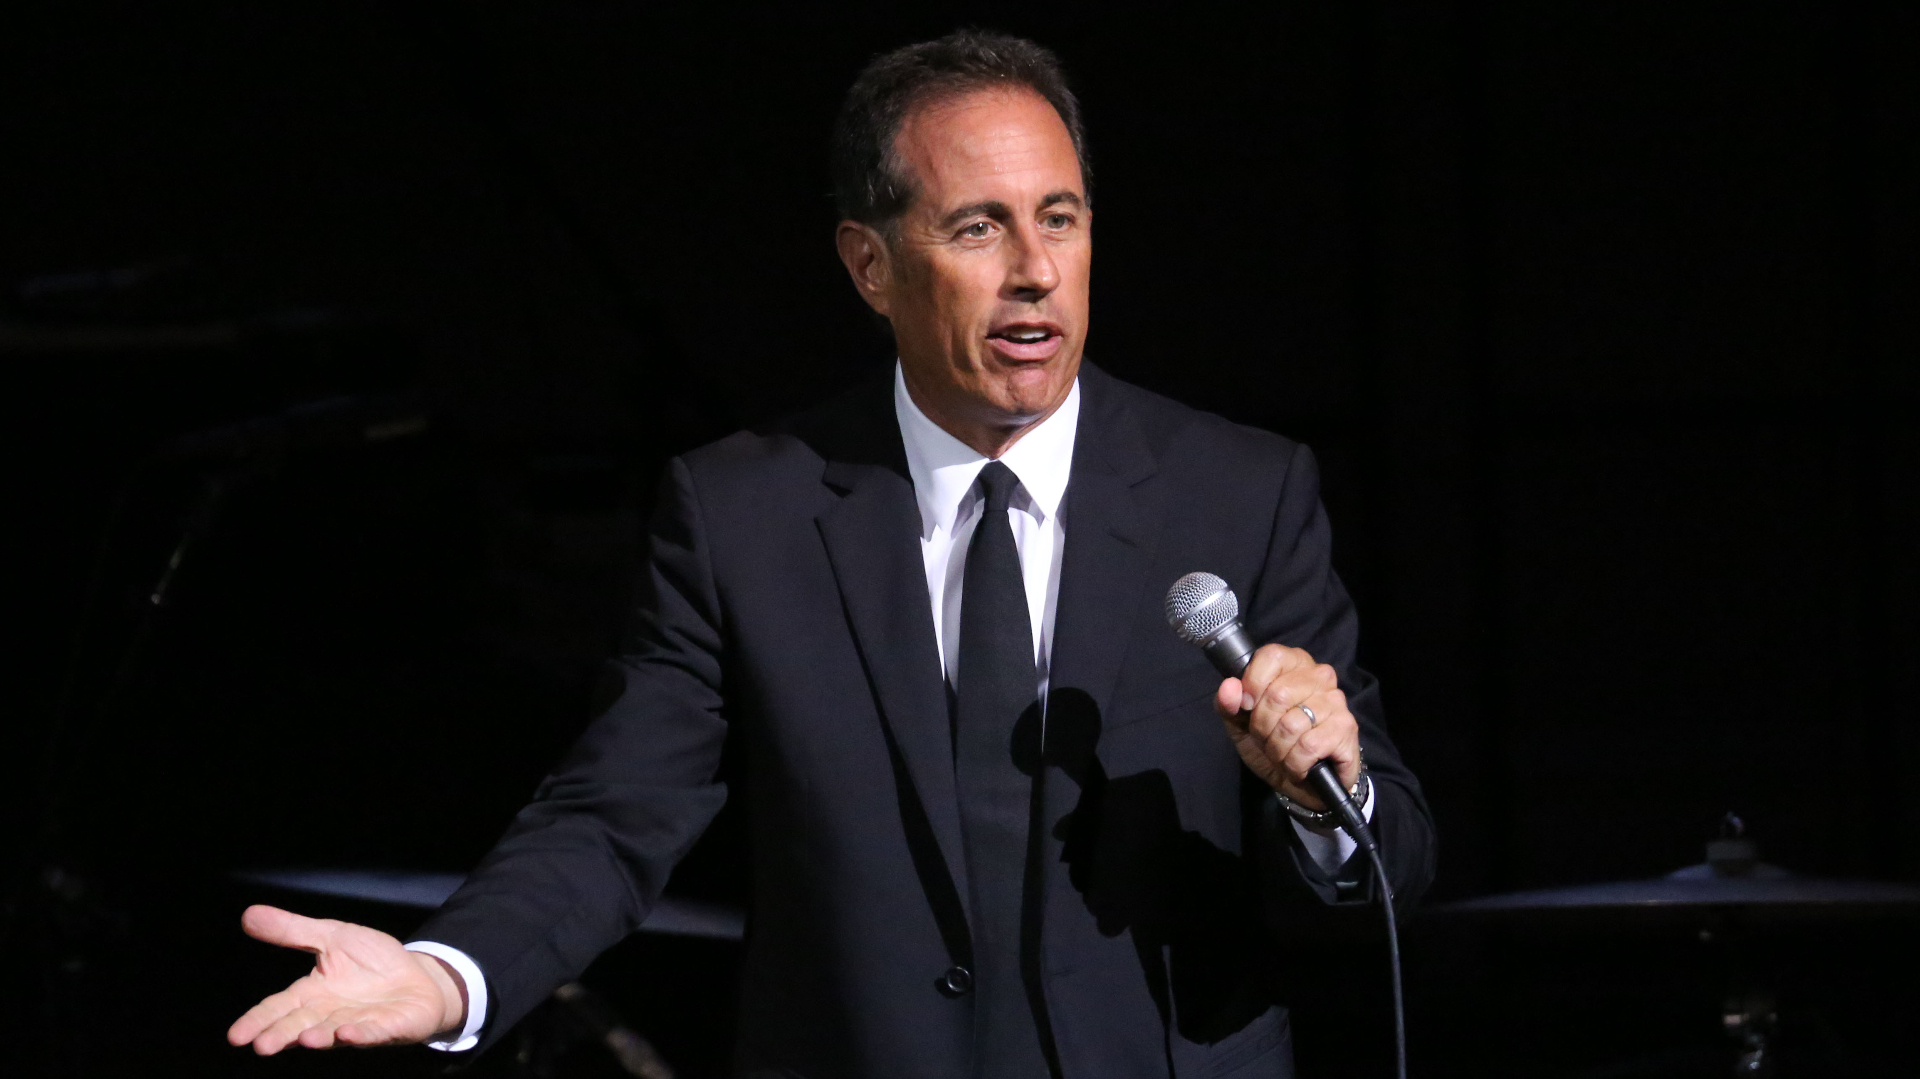 Seinfeld Thinks ‘Extreme Left and PC Crap’ Ruined TV Comedy Landscape, Fans of ‘Curb’ and ‘It’s Always Sunny’ Call Bullsh*t